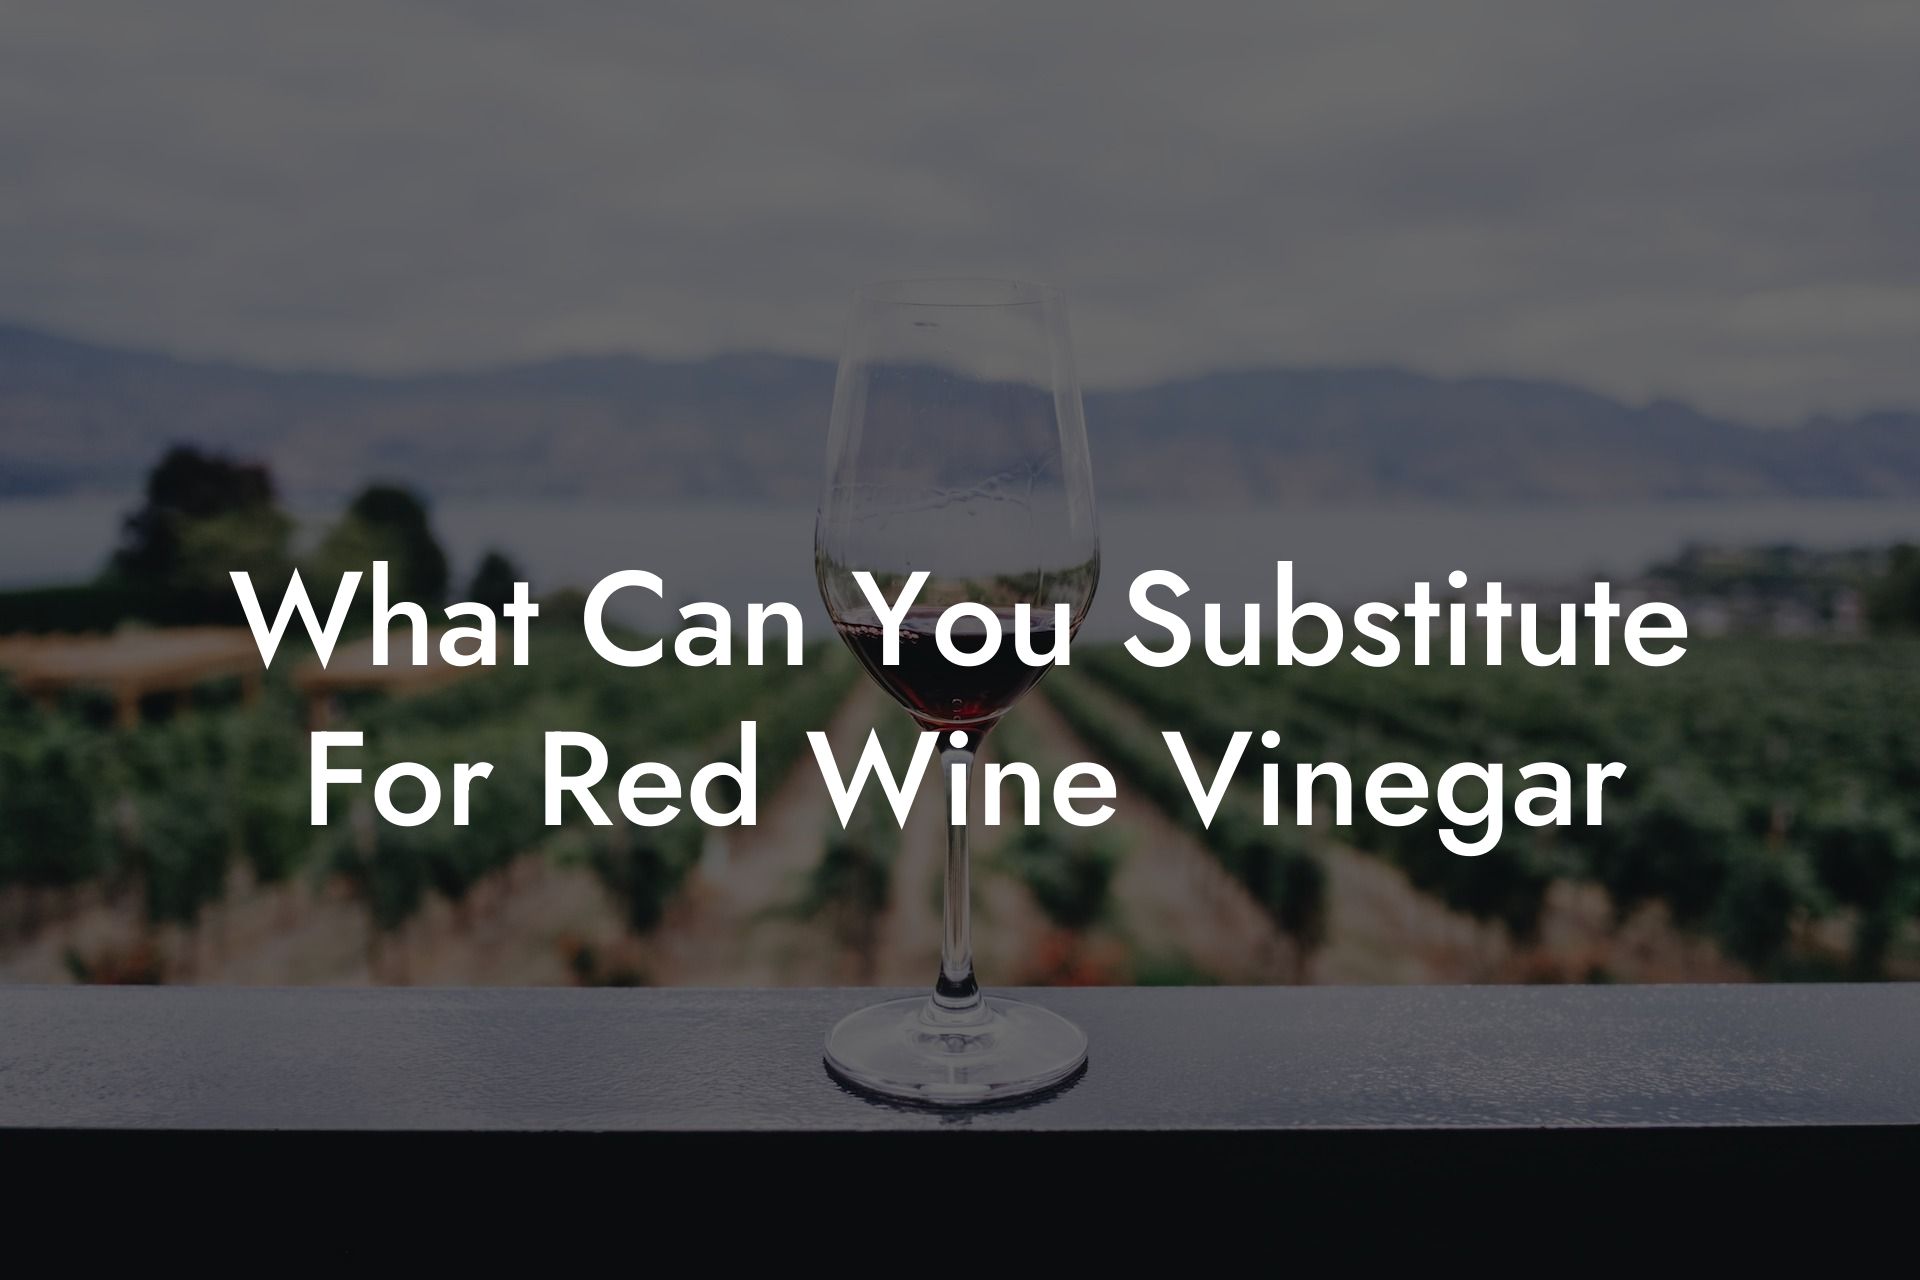 What Can You Substitute For Red Wine Vinegar